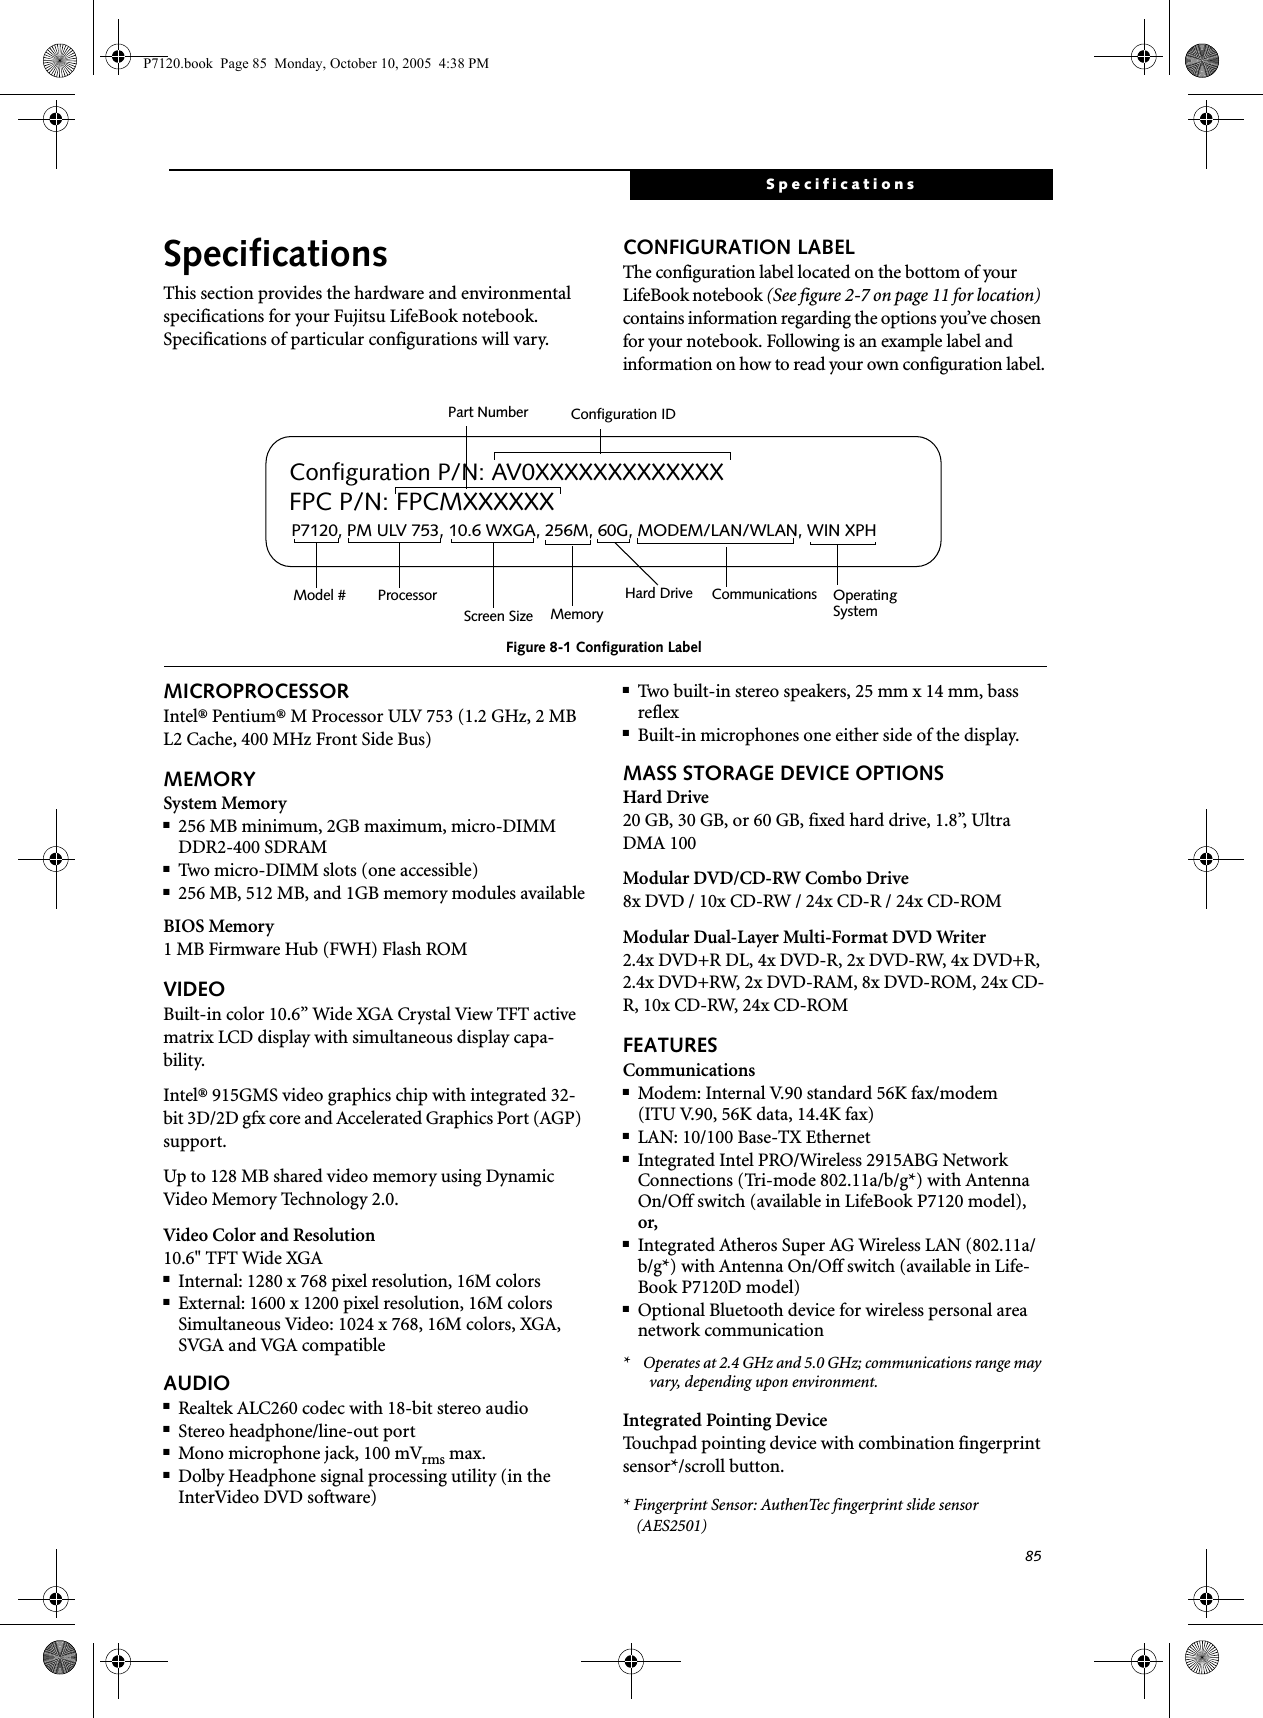 85SpecificationsSpecificationsThis section provides the hardware and environmental specifications for your Fujitsu LifeBook notebook.Specifications of particular configurations will vary.CONFIGURATION LABELThe configuration label located on the bottom of your LifeBook notebook (See figure 2-7 on page 11 for location) contains information regarding the options you’ve chosen for your notebook. Following is an example label and information on how to read your own configuration label.Figure 8-1 Configuration LabelMICROPROCESSORIntel® Pentium® M Processor ULV 753 (1.2 GHz, 2 MB L2 Cache, 400 MHz Front Side Bus)MEMORYSystem Memory■256 MB minimum, 2GB maximum, micro-DIMM DDR2-400 SDRAM■Two micro-DIMM slots (one accessible)■256 MB, 512 MB, and 1GB memory modules availableBIOS Memory1 MB Firmware Hub (FWH) Flash ROMVIDEOBuilt-in color 10.6” Wide XGA Crystal View TFT active matrix LCD display with simultaneous display capa-bility.Intel® 915GMS video graphics chip with integrated 32-bit 3D/2D gfx core and Accelerated Graphics Port (AGP) support. Up to 128 MB shared video memory using Dynamic Video Memory Technology 2.0.Video Color and Resolution10.6&quot; TFT Wide XGA■Internal: 1280 x 768 pixel resolution, 16M colors■External: 1600 x 1200 pixel resolution, 16M colorsSimultaneous Video: 1024 x 768, 16M colors, XGA, SVGA and VGA compatibleAUDIO■Realtek ALC260 codec with 18-bit stereo audio■Stereo headphone/line-out port ■Mono microphone jack, 100 mVrms max.■Dolby Headphone signal processing utility (in the InterVideo DVD software)■Two built-in stereo speakers, 25 mm x 14 mm, bass reflex■Built-in microphones one either side of the display.MASS STORAGE DEVICE OPTIONSHard Drive20 GB, 30 GB, or 60 GB, fixed hard drive, 1.8”, Ultra DMA 100Modular DVD/CD-RW Combo Drive8x DVD / 10x CD-RW / 24x CD-R / 24x CD-ROMModular Dual-Layer Multi-Format DVD Writer2.4x DVD+R DL, 4x DVD-R, 2x DVD-RW, 4x DVD+R, 2.4x DVD+RW, 2x DVD-RAM, 8x DVD-ROM, 24x CD-R, 10x CD-RW, 24x CD-ROMFEATURESCommunications■Modem: Internal V.90 standard 56K fax/modem(ITU V.90, 56K data, 14.4K fax) ■LAN: 10/100 Base-TX Ethernet ■Integrated Intel PRO/Wireless 2915ABG Network Connections (Tri-mode 802.11a/b/g*) with Antenna On/Off switch (available in LifeBook P7120 model), or,■Integrated Atheros Super AG Wireless LAN (802.11a/b/g*) with Antenna On/Off switch (available in Life-Book P7120D model)■Optional Bluetooth device for wireless personal area network communication*    Operates at 2.4 GHz and 5.0 GHz; communications range may vary, depending upon environment.Integrated Pointing DeviceTouchpad pointing device with combination fingerprint sensor*/scroll button.* Fingerprint Sensor: AuthenTec fingerprint slide sensor (AES2501)P7120, PM ULV 753, 10.6 WXGA, 256M, 60G, MODEM/LAN/WLAN, WIN XPHConfiguration P/N: AV0XXXXXXXXXXXXXFPC P/N: FPCMXXXXXXOperating Hard Drive Configuration IDPart NumberProcessorModel #Screen Size Memory SystemCommunicationsP7120.book  Page 85  Monday, October 10, 2005  4:38 PM